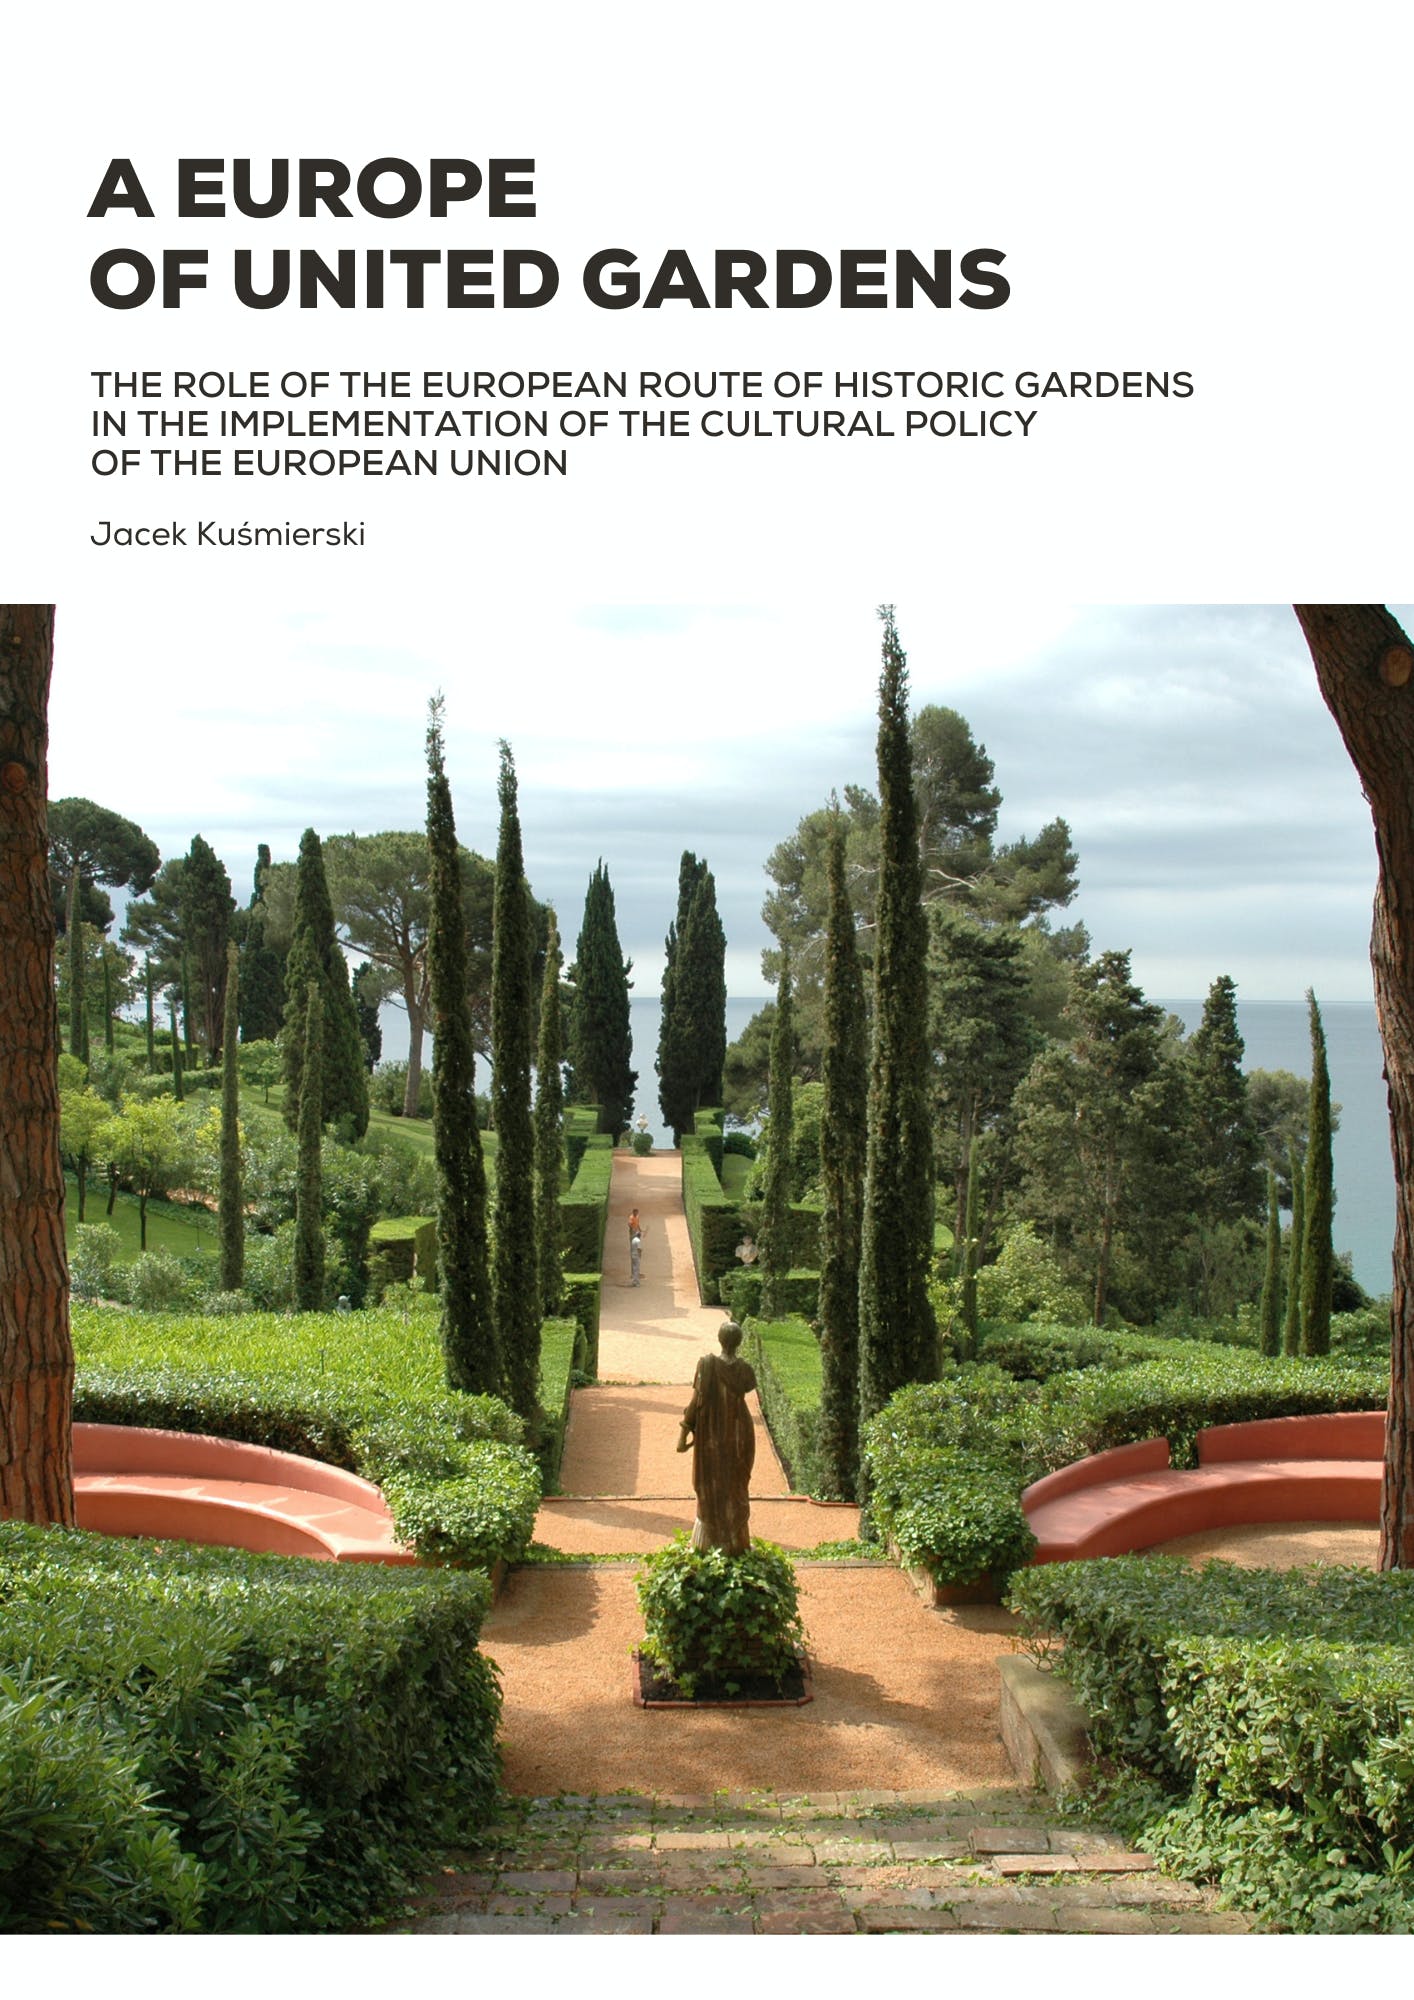 A Europe of united gardens. The role of the ERHG in the implementation of the cultural policy of the European Union